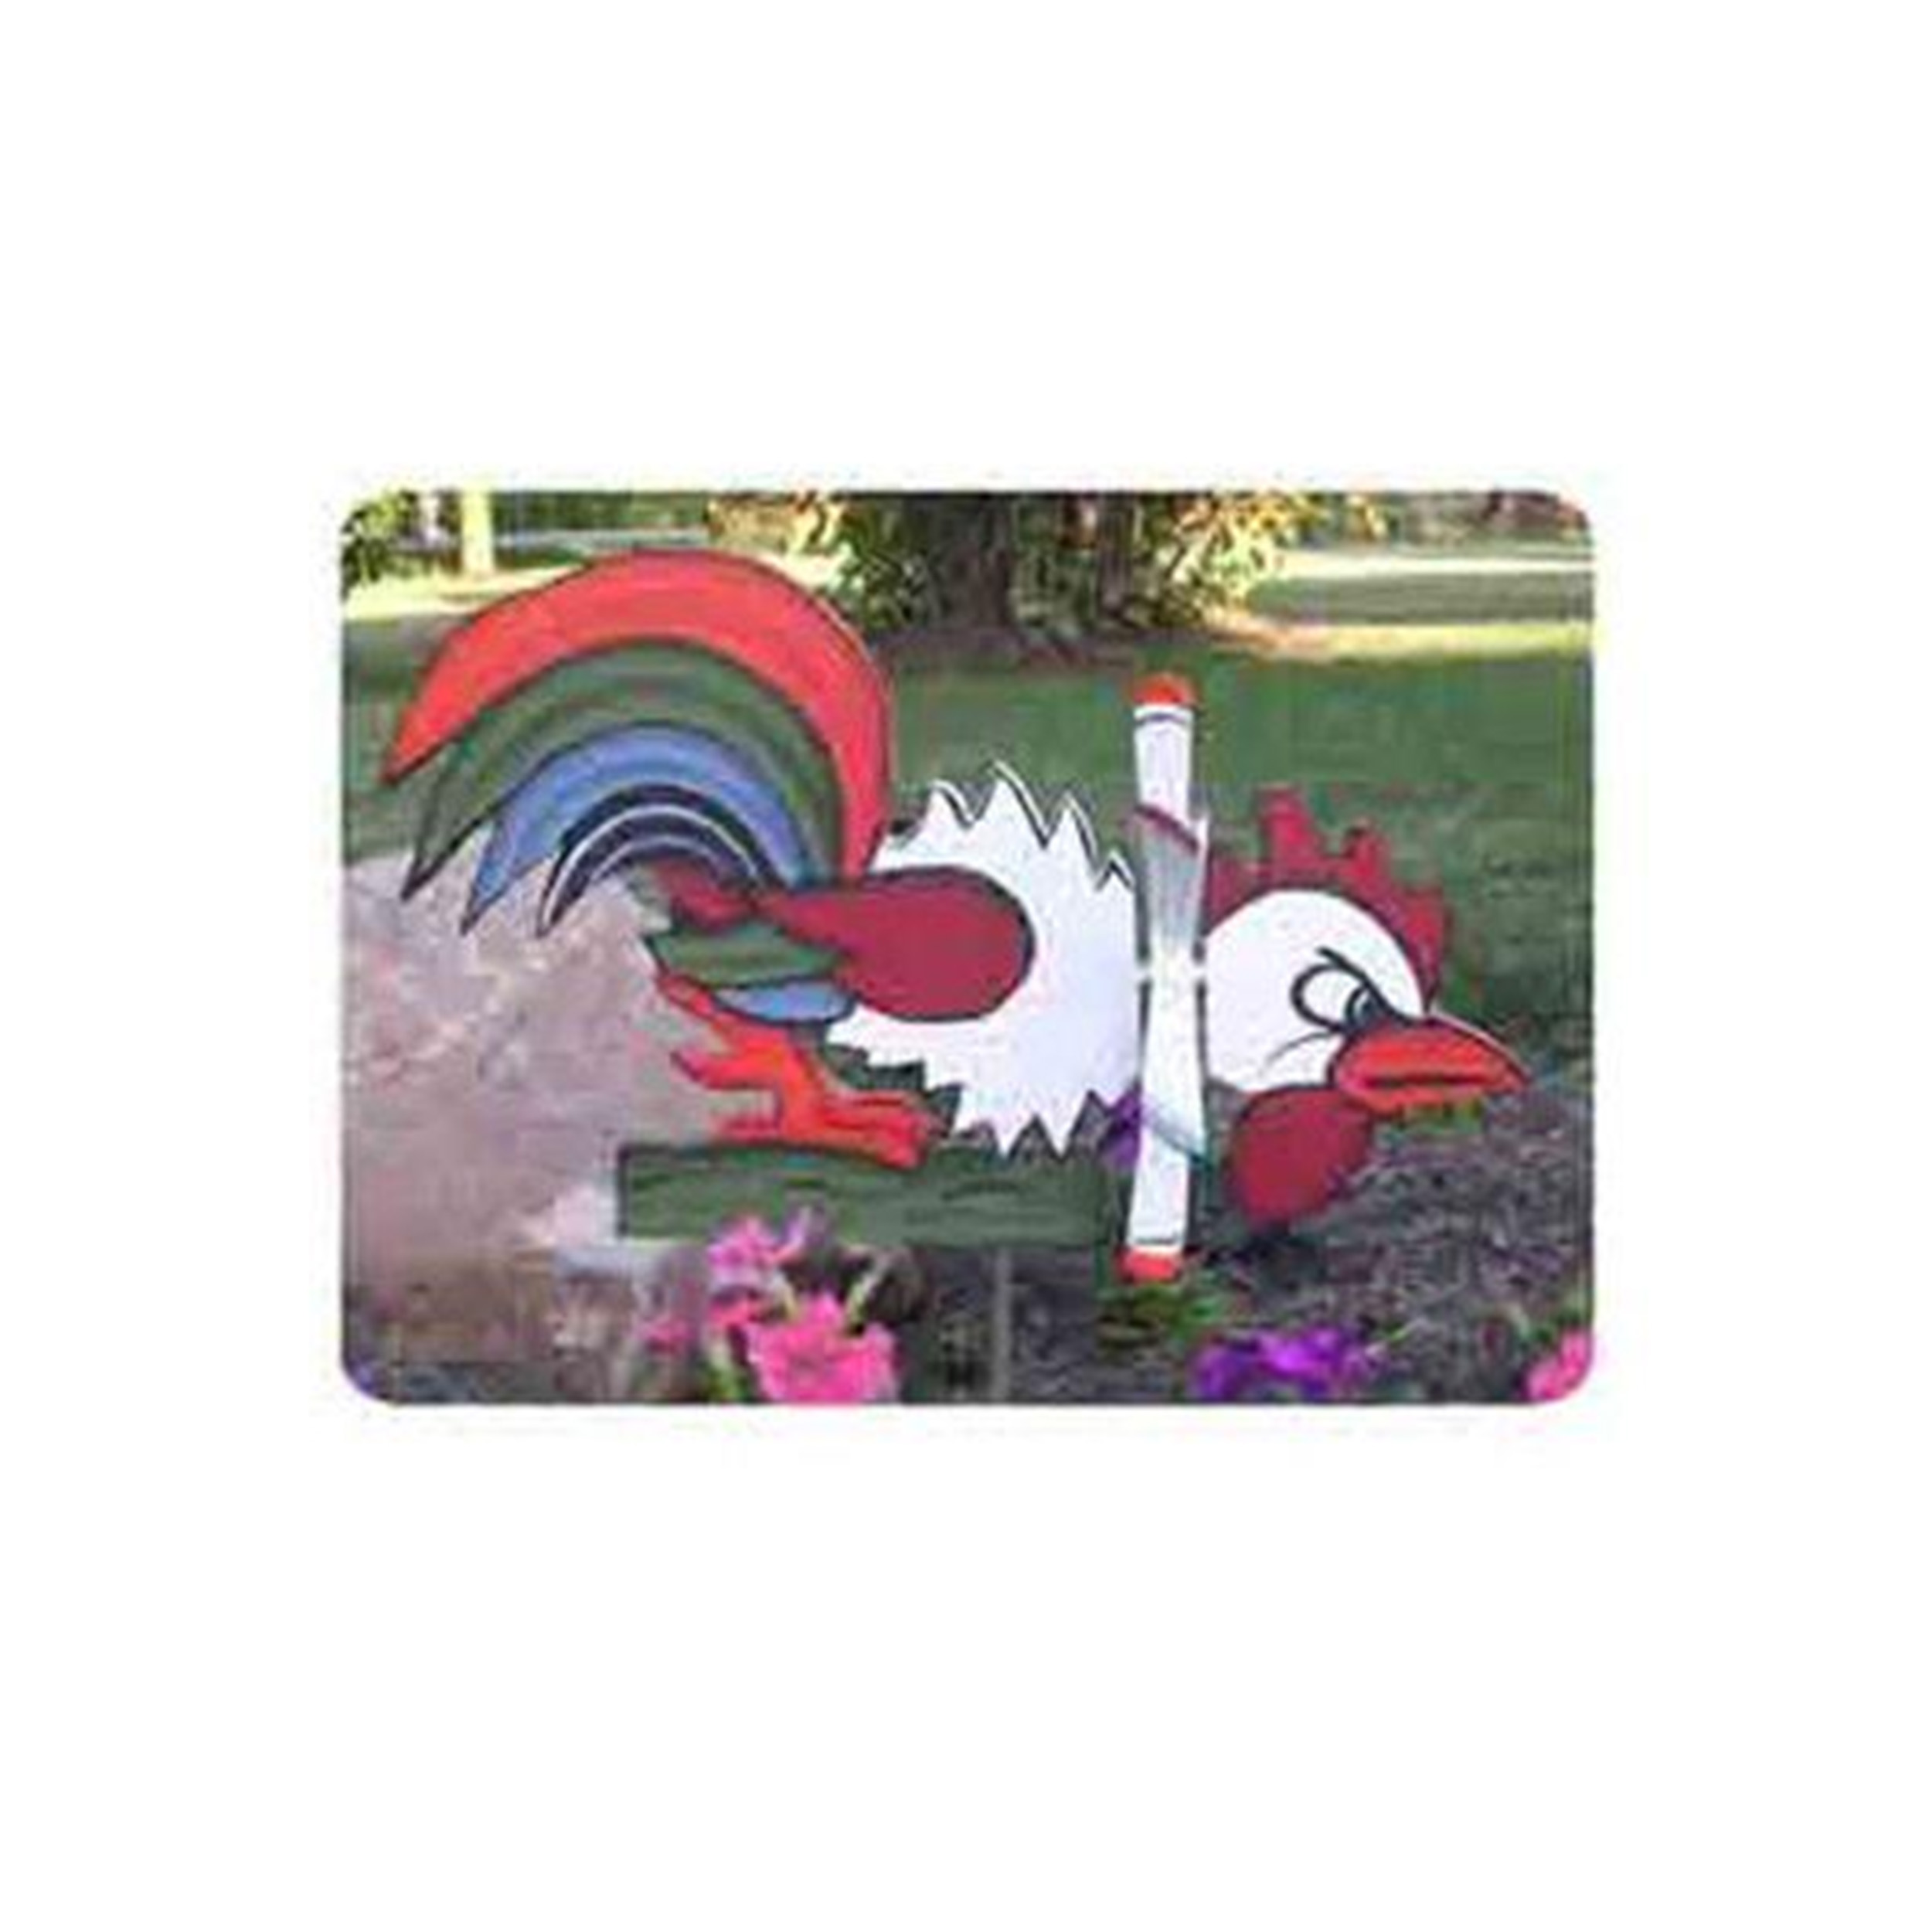 Woodworking Project Paper Plan To Build Fighting Rooster Whirligig